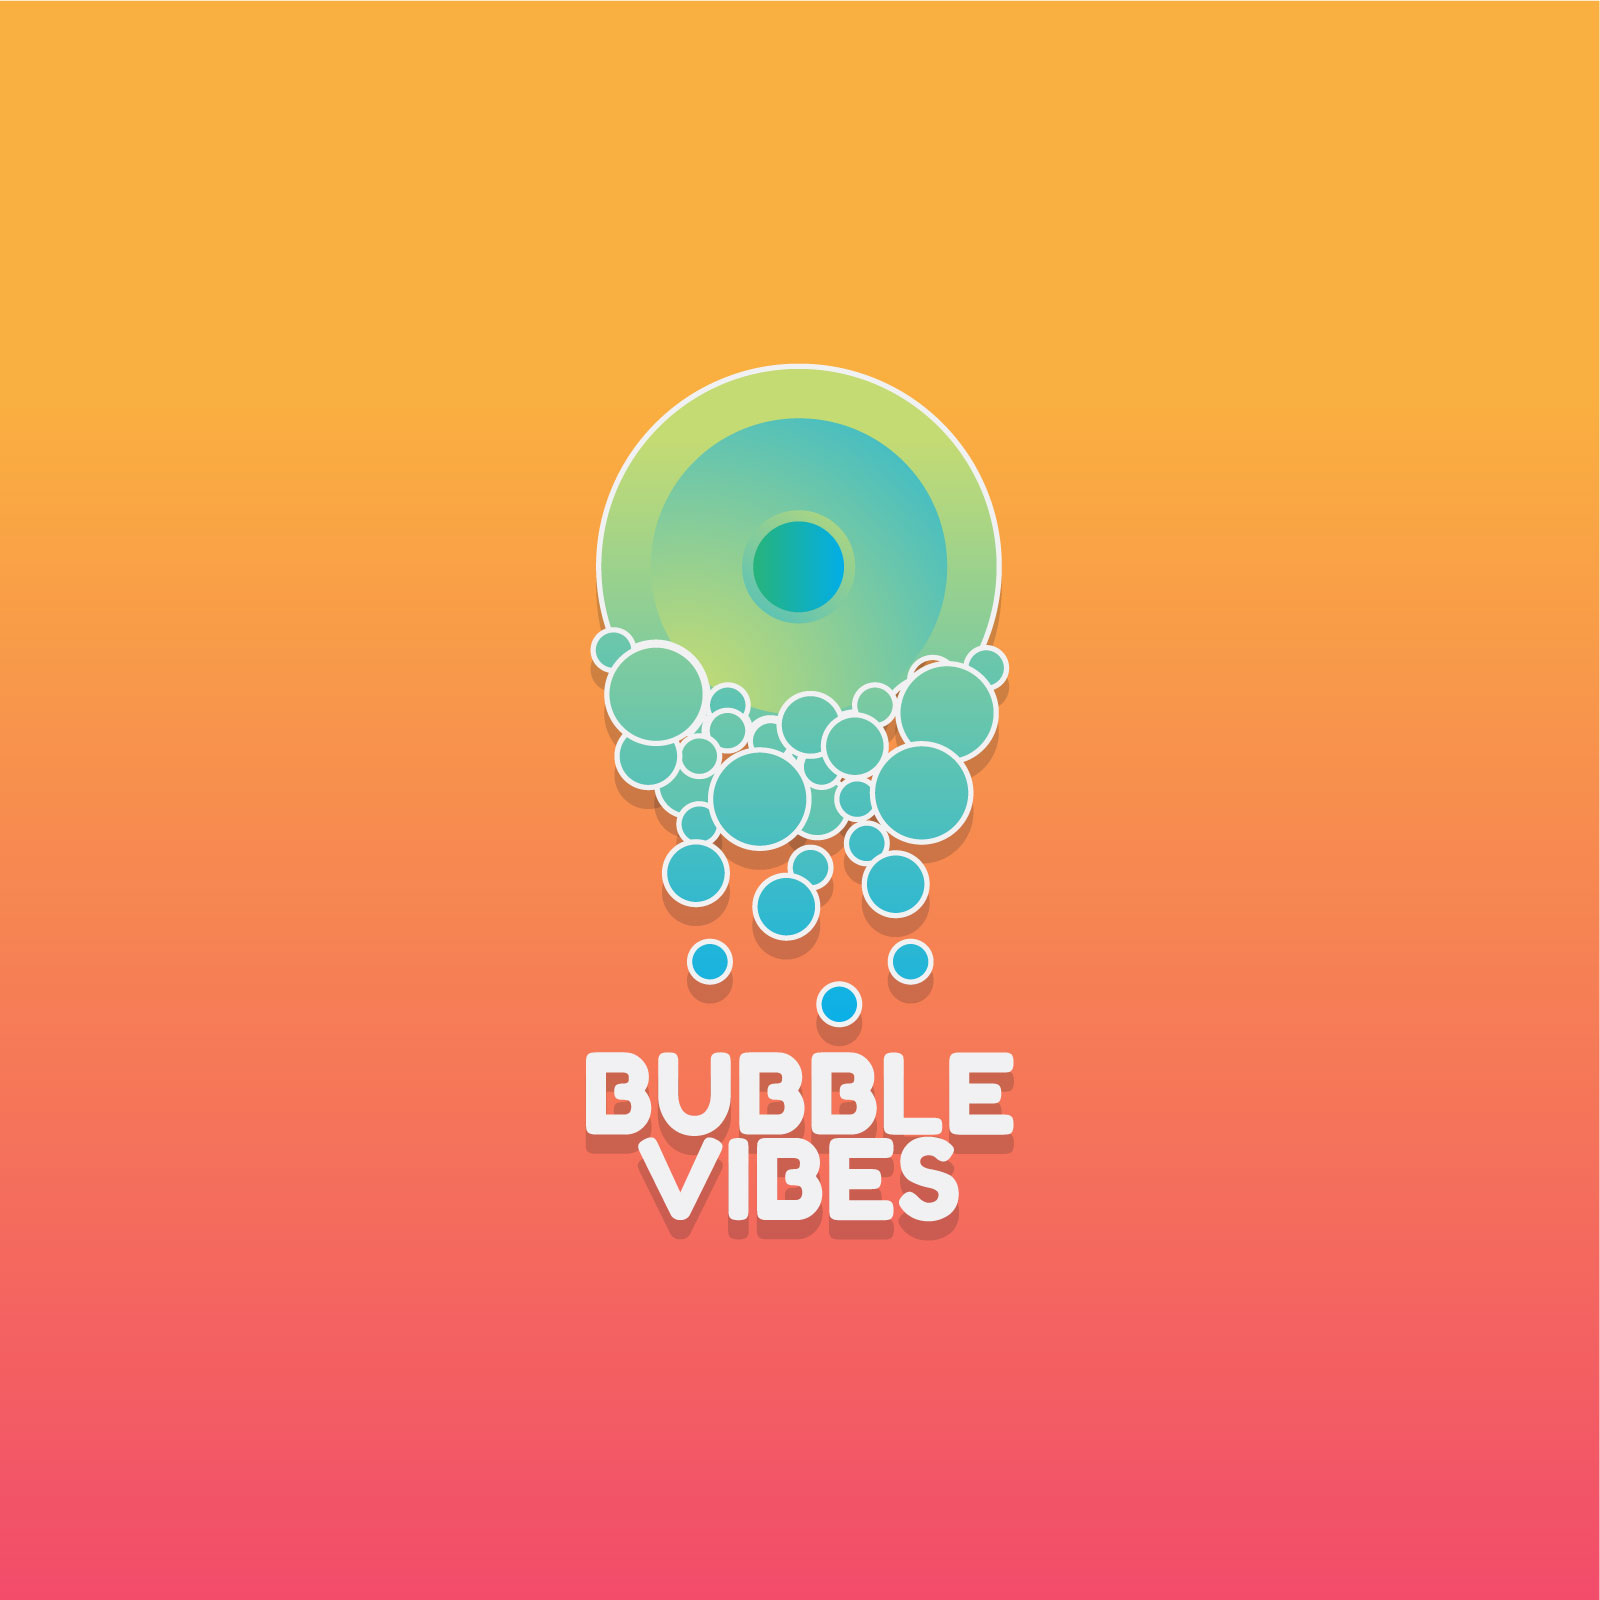 BubbleVibes Logo Design
  
  <p>CONCEPT: Design Logo for a soda brand using 5 sense as inspiration</p>
  <p>HOW DESIGN SOLVES PROBLEMS:  Combination of speakers with bubbles creating visual appealing shapes.</p>
  <p>PROCESS: sketching in sketchbook</p>
  <p>TOOLS USED:  pen/paper Illustrator</p>
  <p>CHALLENGES:  Creating a link between speakers and bubbles.</p>
  